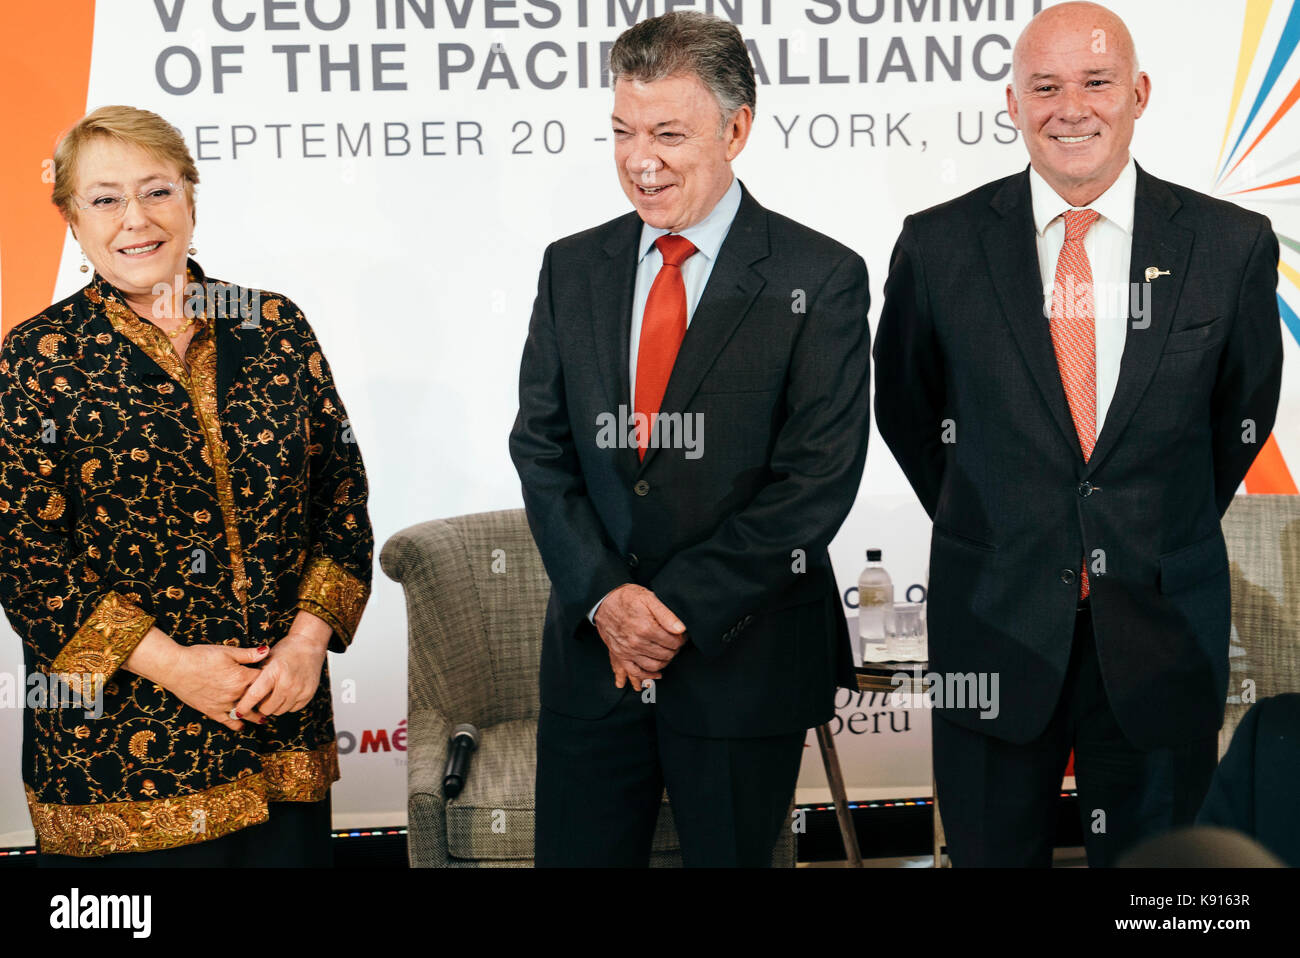 Chilean President Michelle Bachelet, Colombia President Juan Manuel Santos  and Trade Minister of Peru Eduardo Ferreyros speakers at the CEO Investment Summit of The Pacific Alliance during UNGA Stock Photo